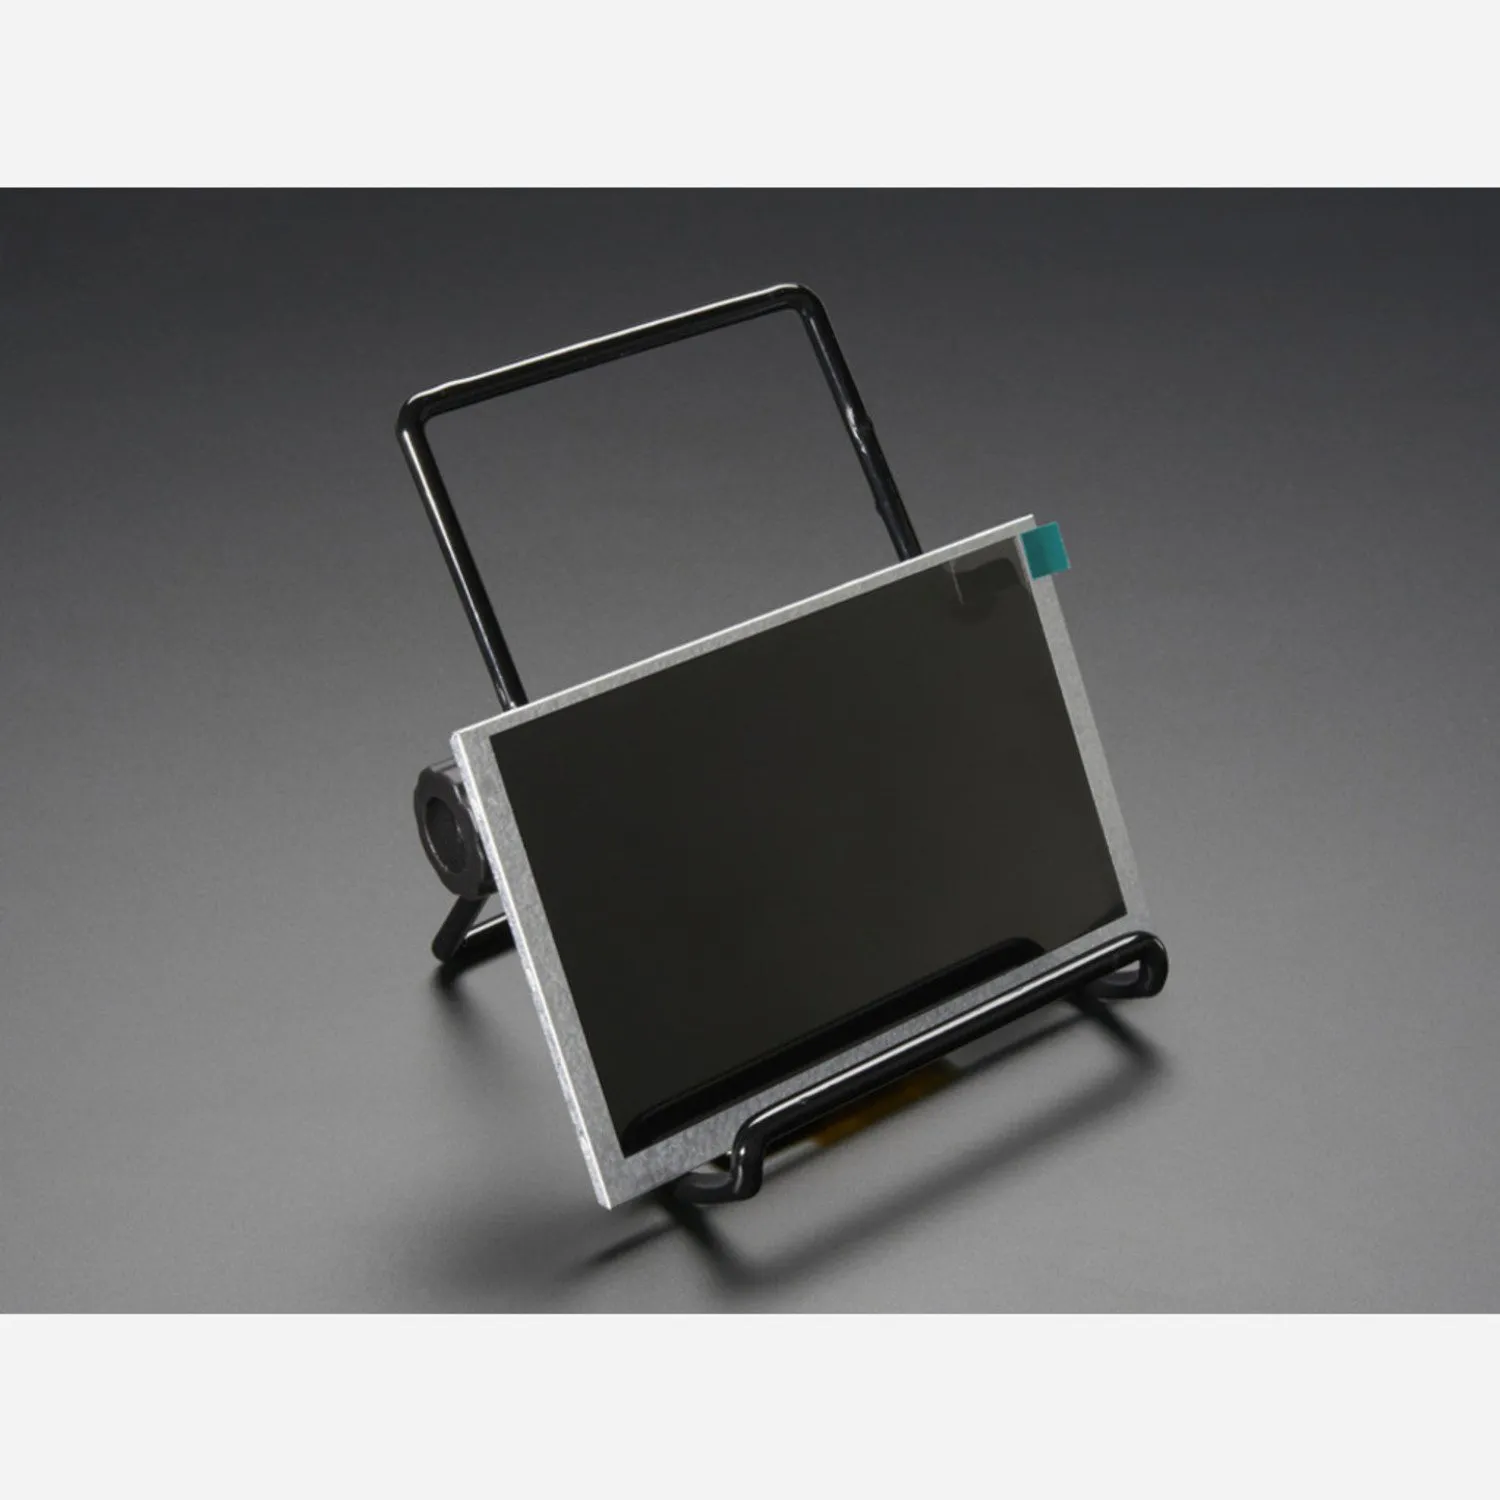 Photo of Adjustable Bent-Wire Stand - up to 7 Tablets and Small Screens